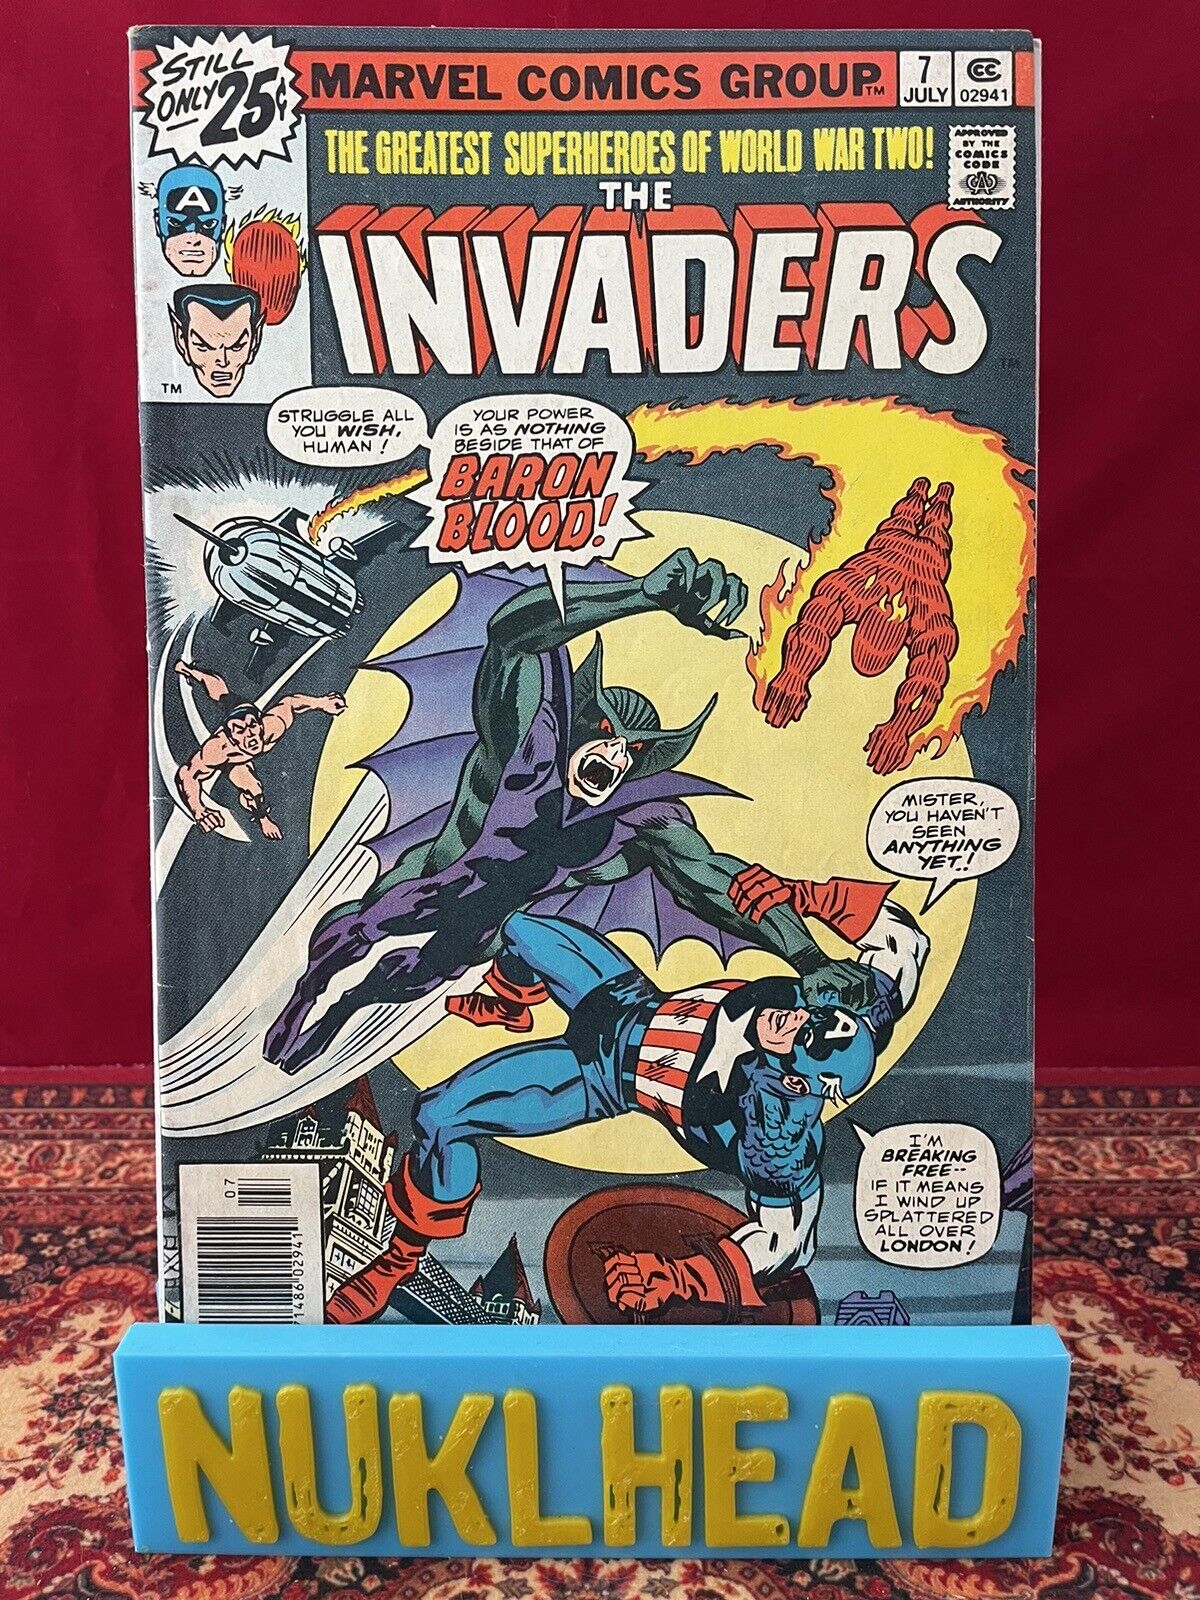 The Invaders #7 Marvel 1976 1st App. Baron Blood and Union Jack Newsstand